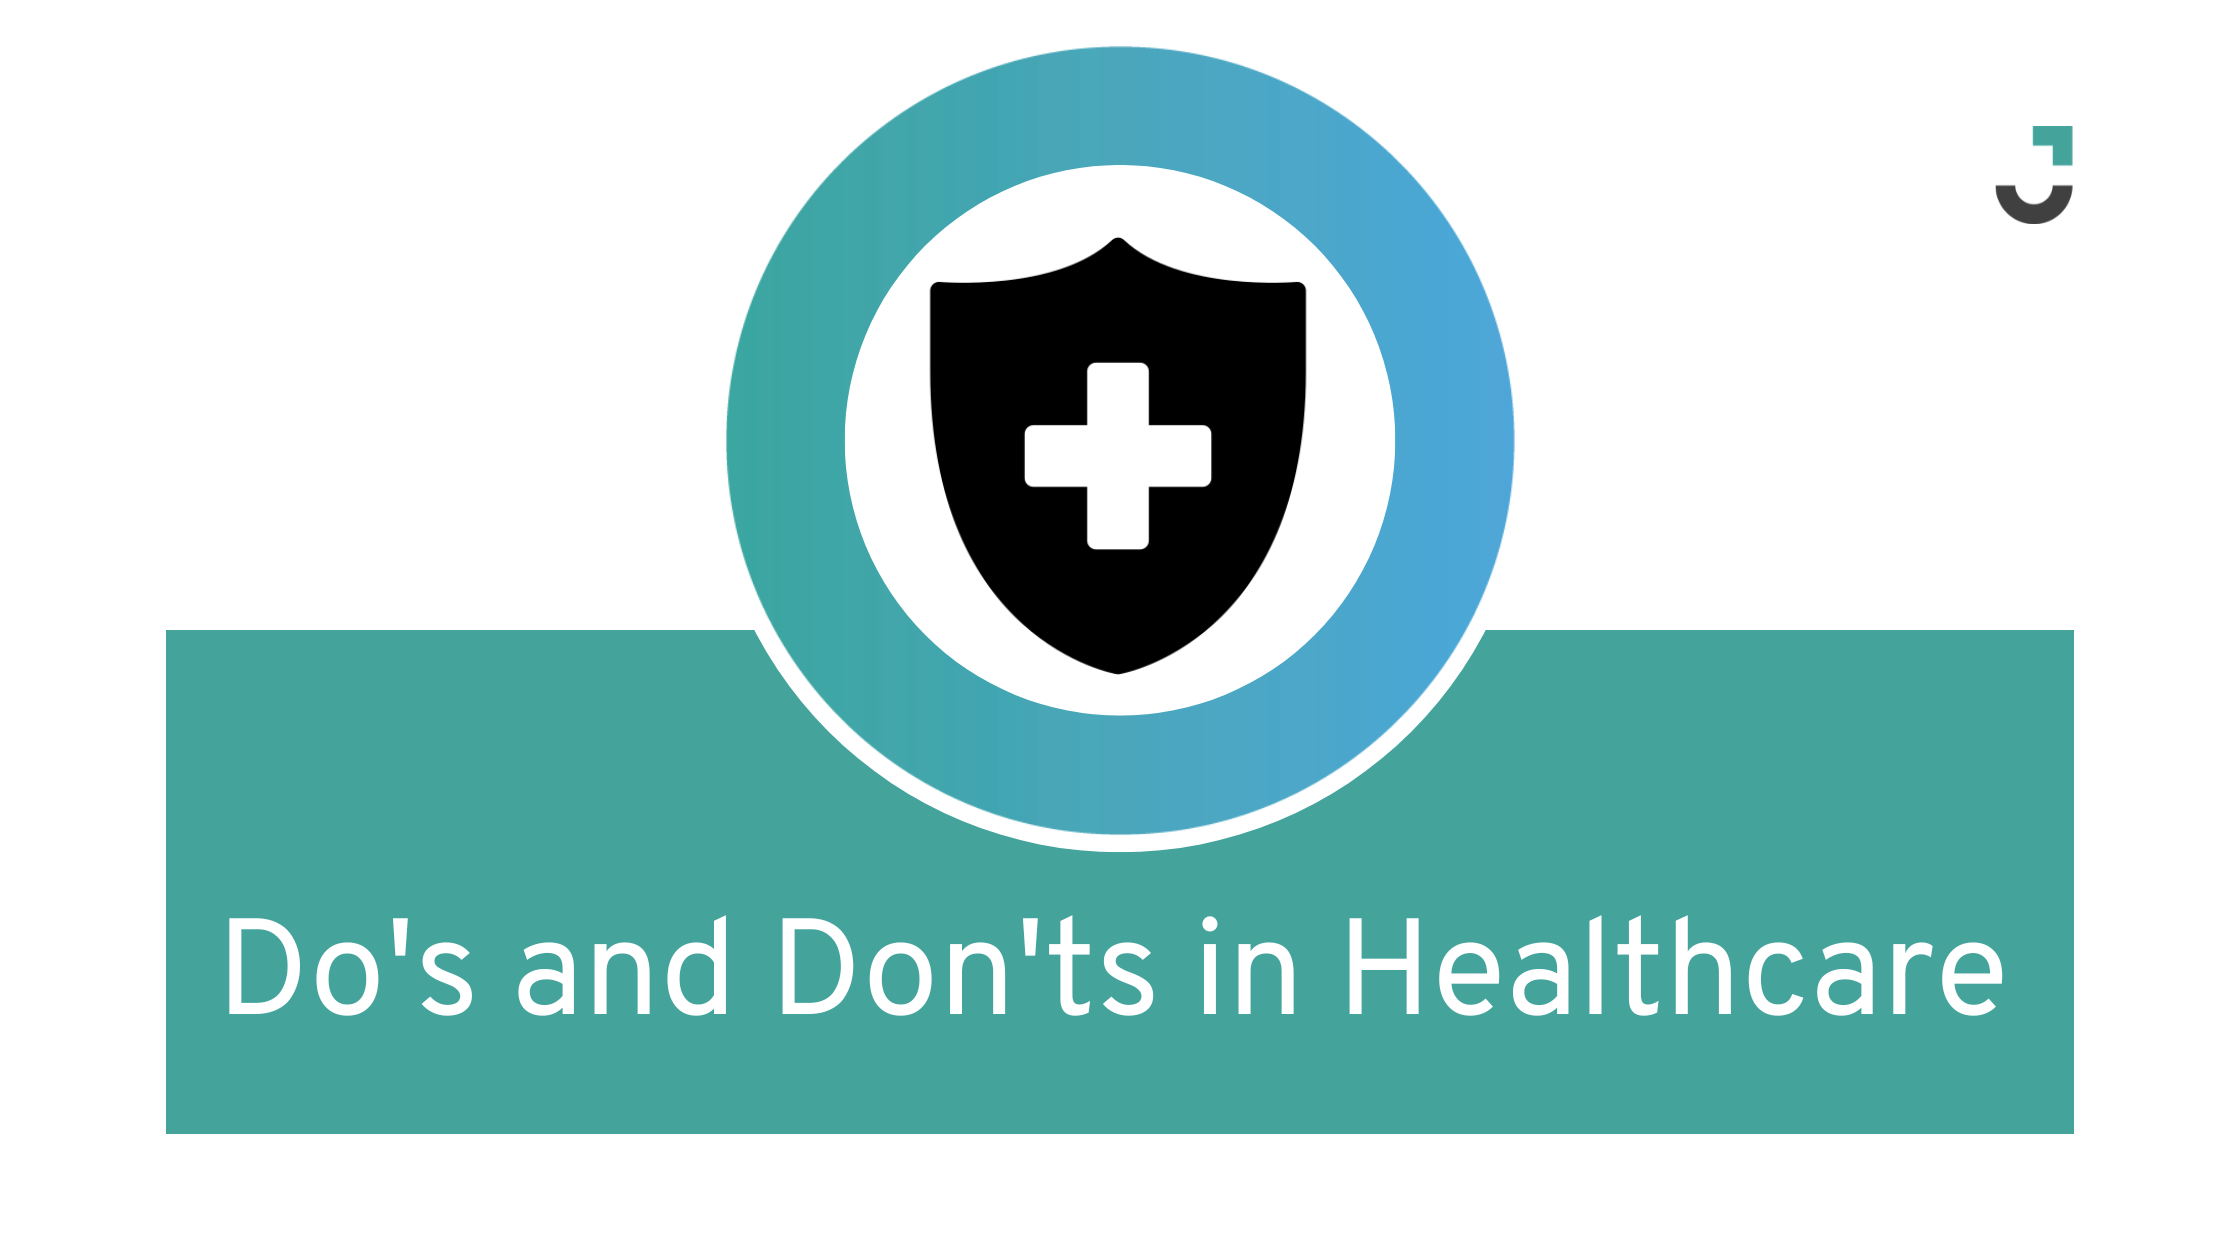 Do's and Don'ts in Healthcare